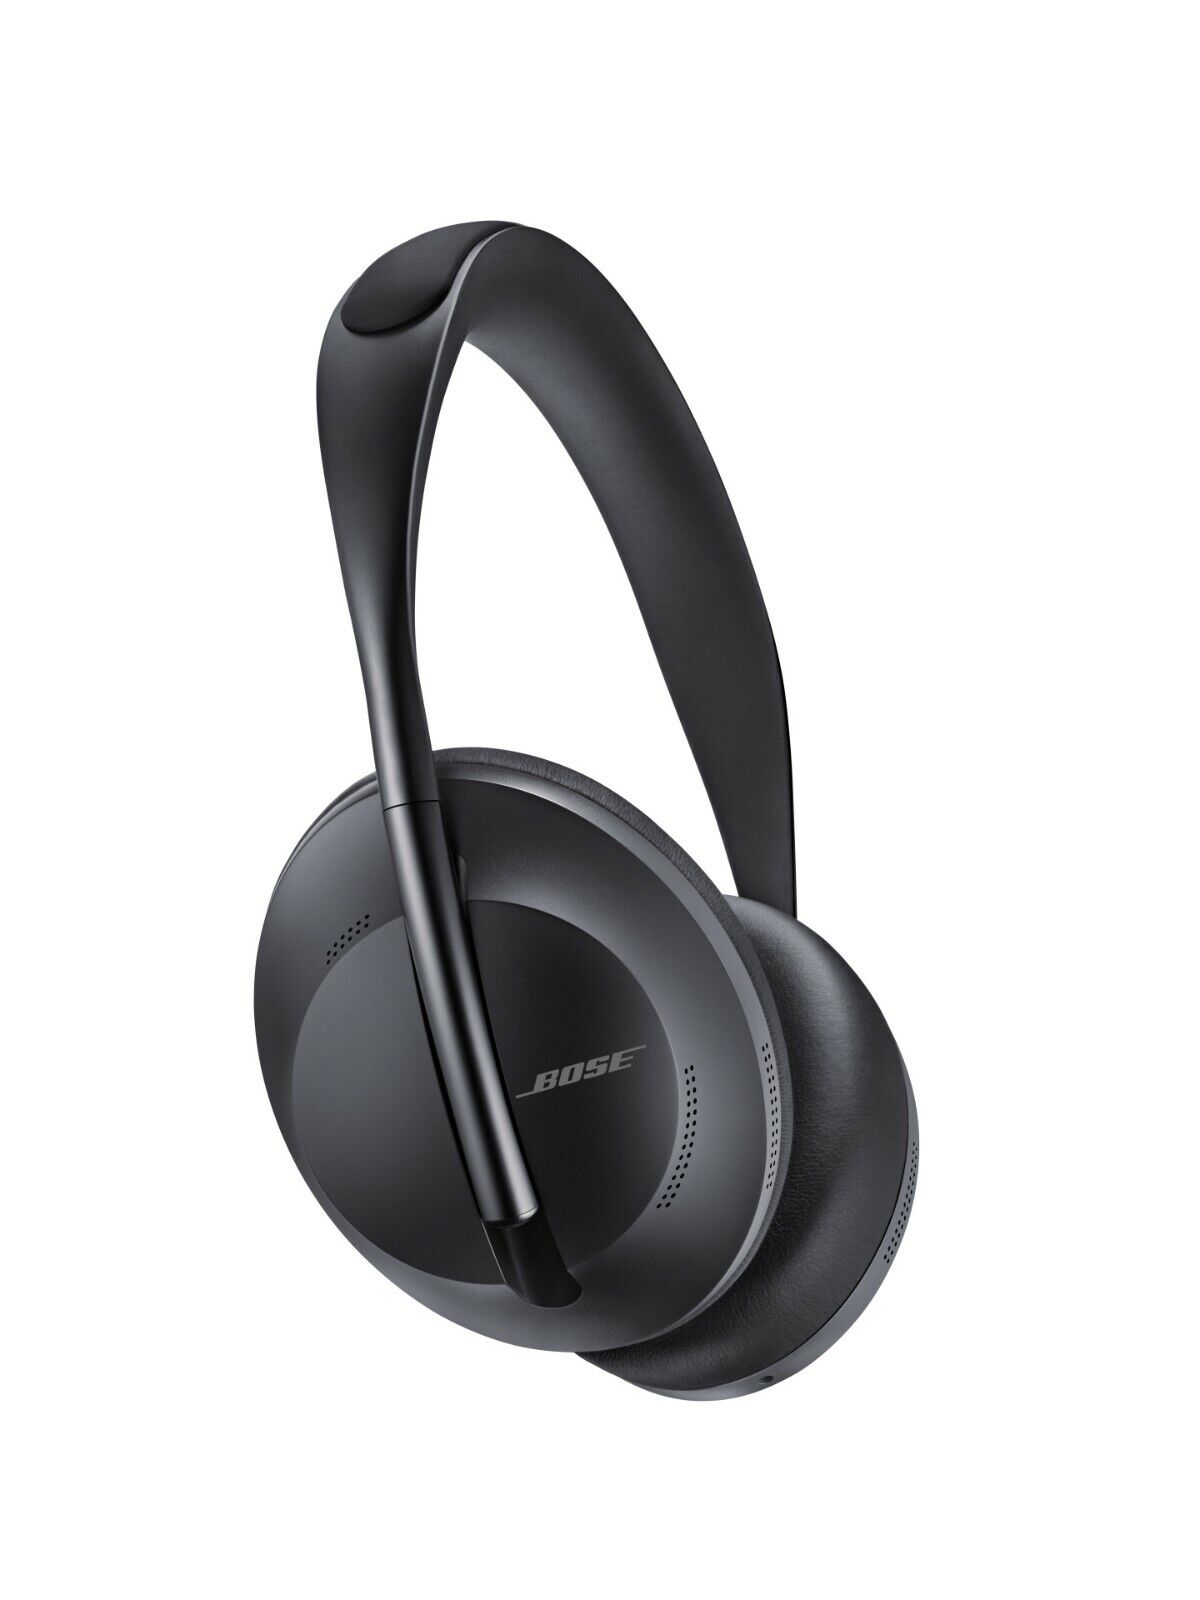 Bose Noise Cancelling Bluetooth Headphones 700, Certified Refurbished